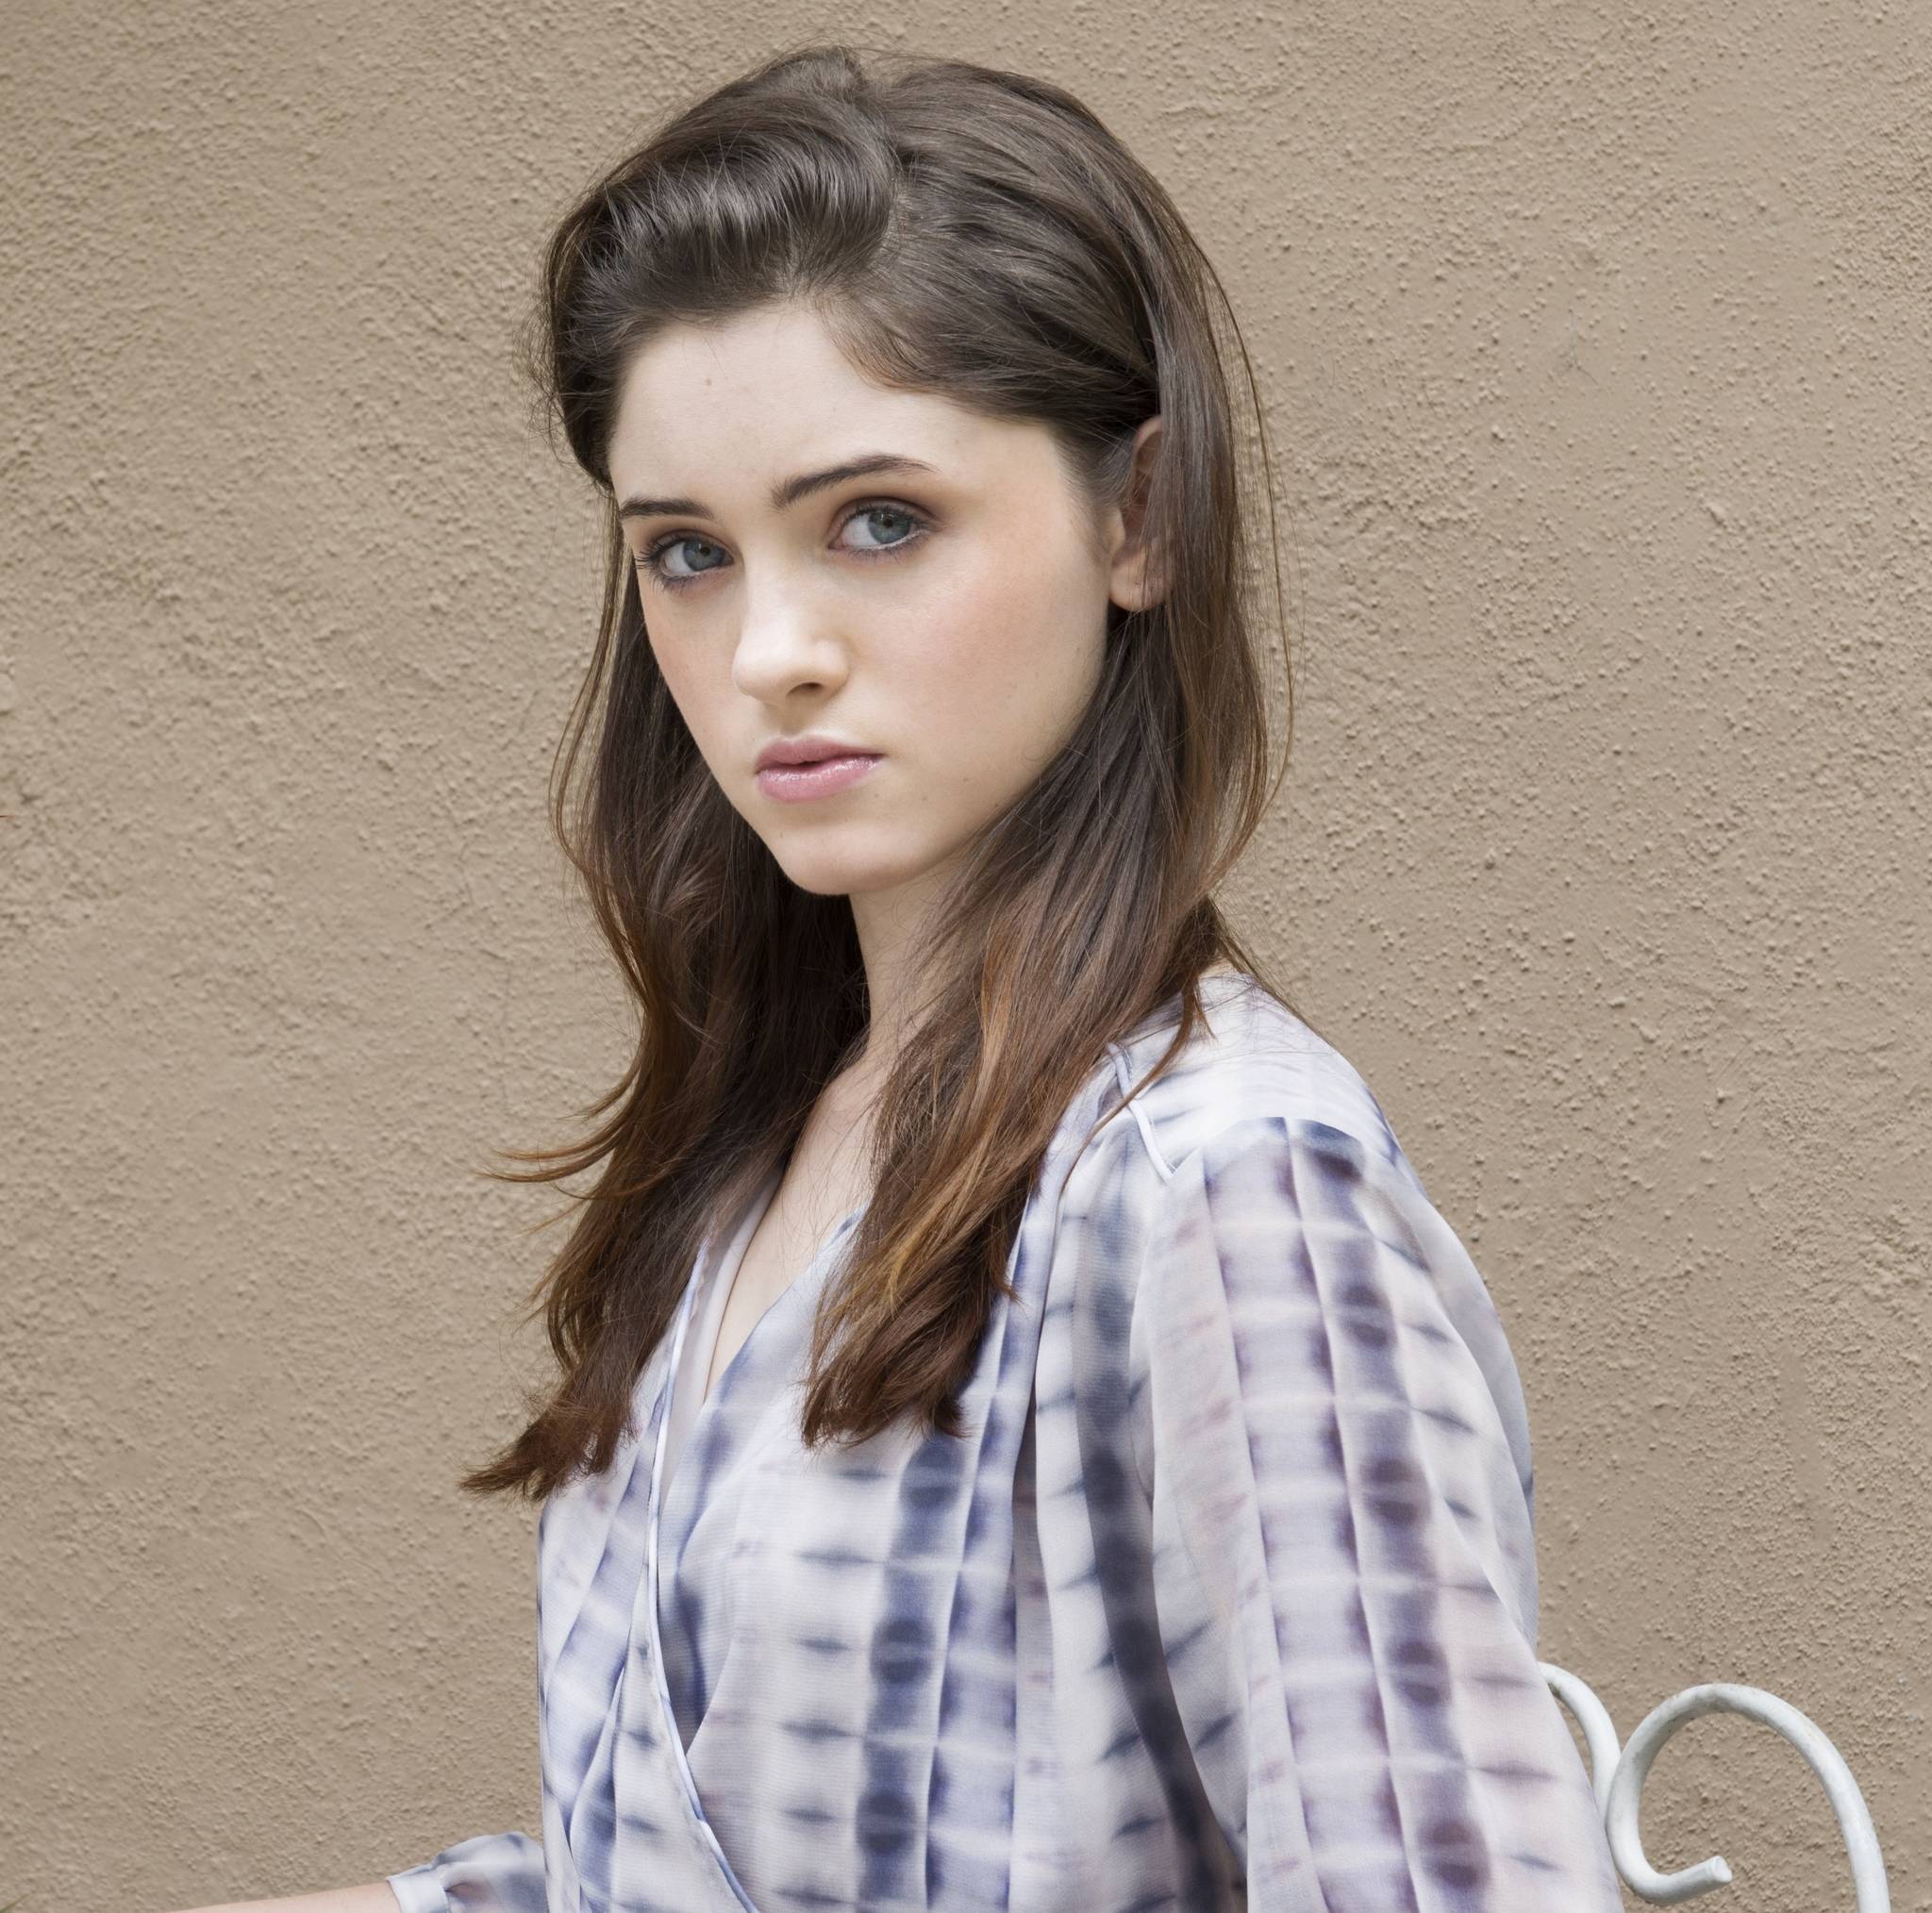 Natalia Dyer 2019 Wallpapers